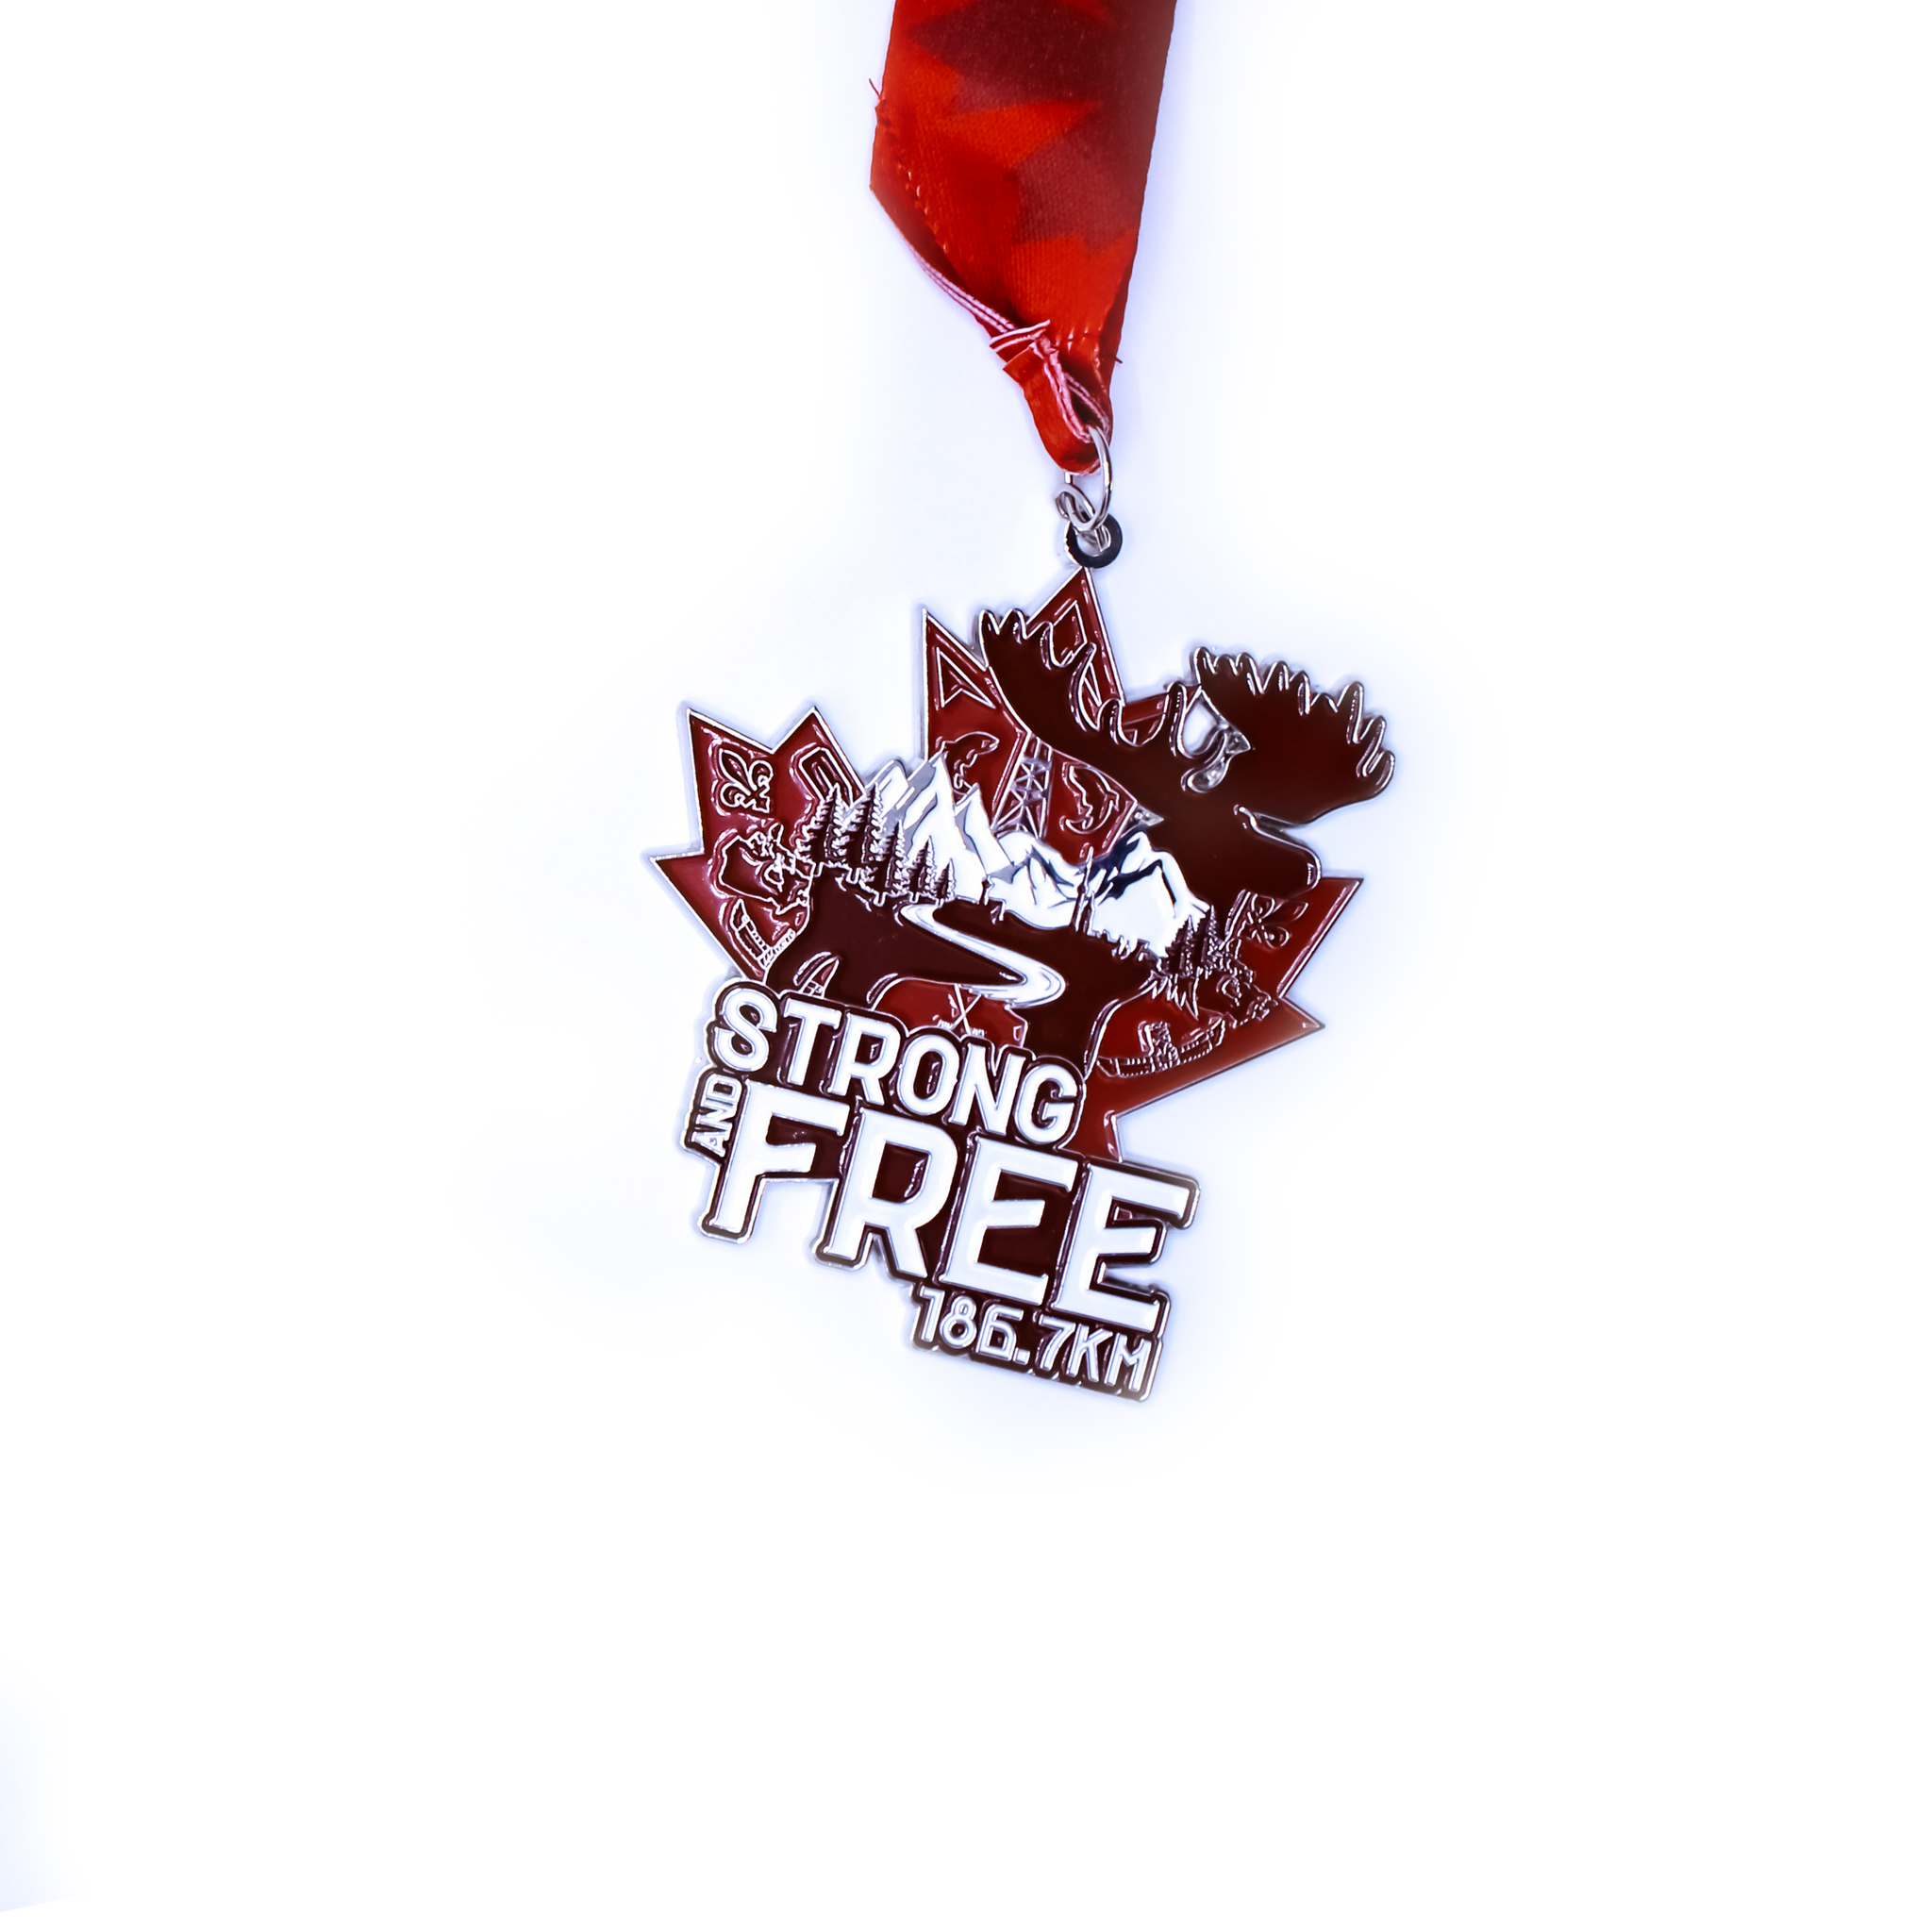 Strong & Free 186.7km Challenge - Entry + Medal